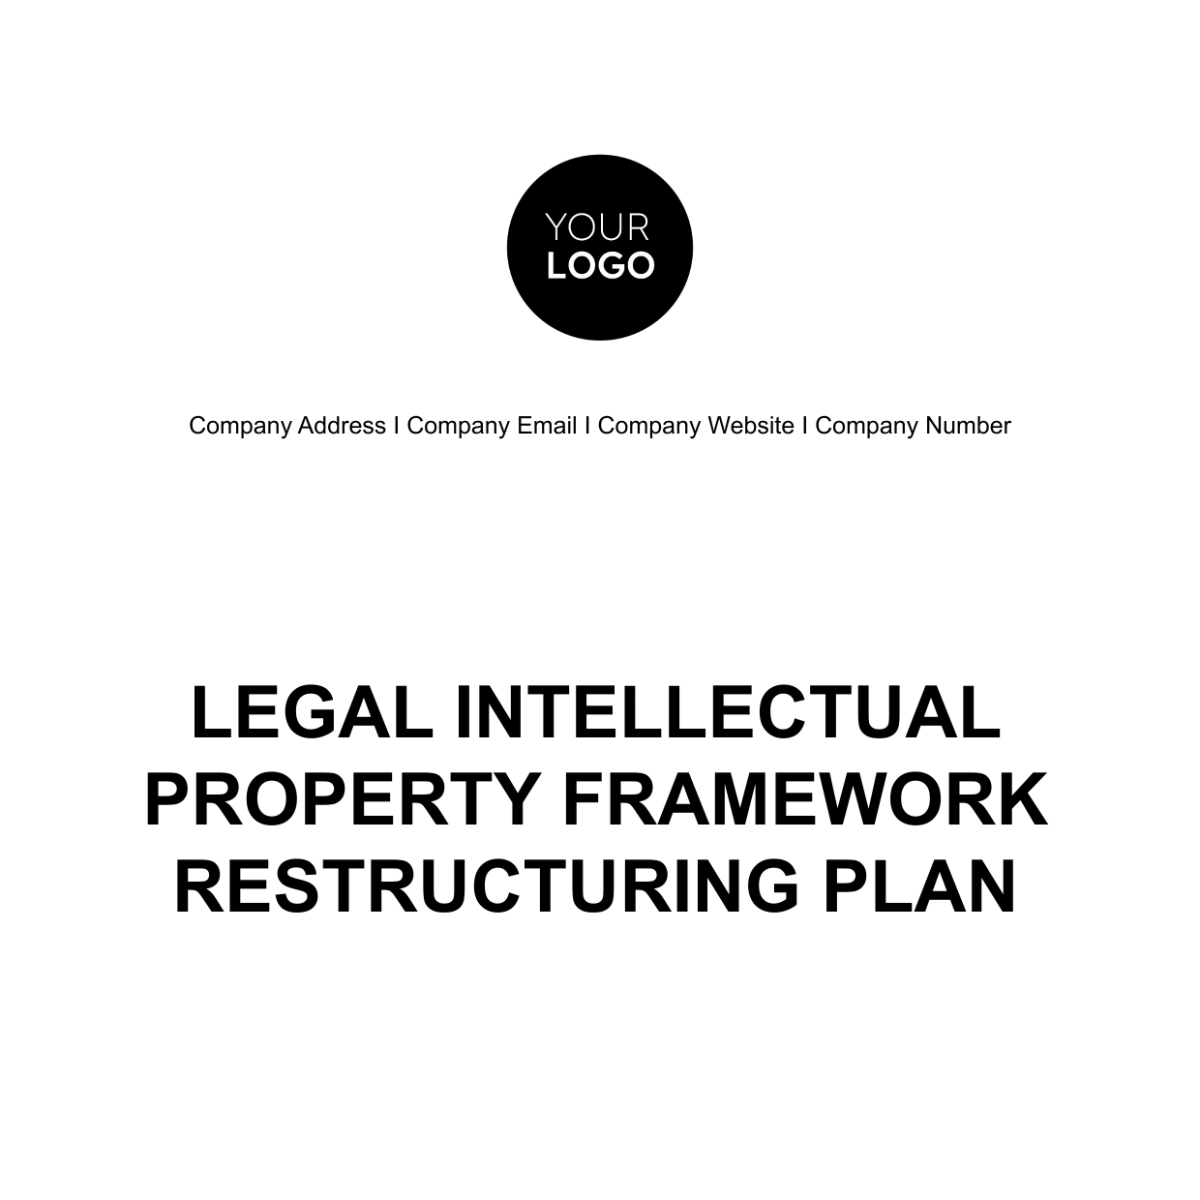 Free Legal Intellectual Property Framework Restructuring Plan Template